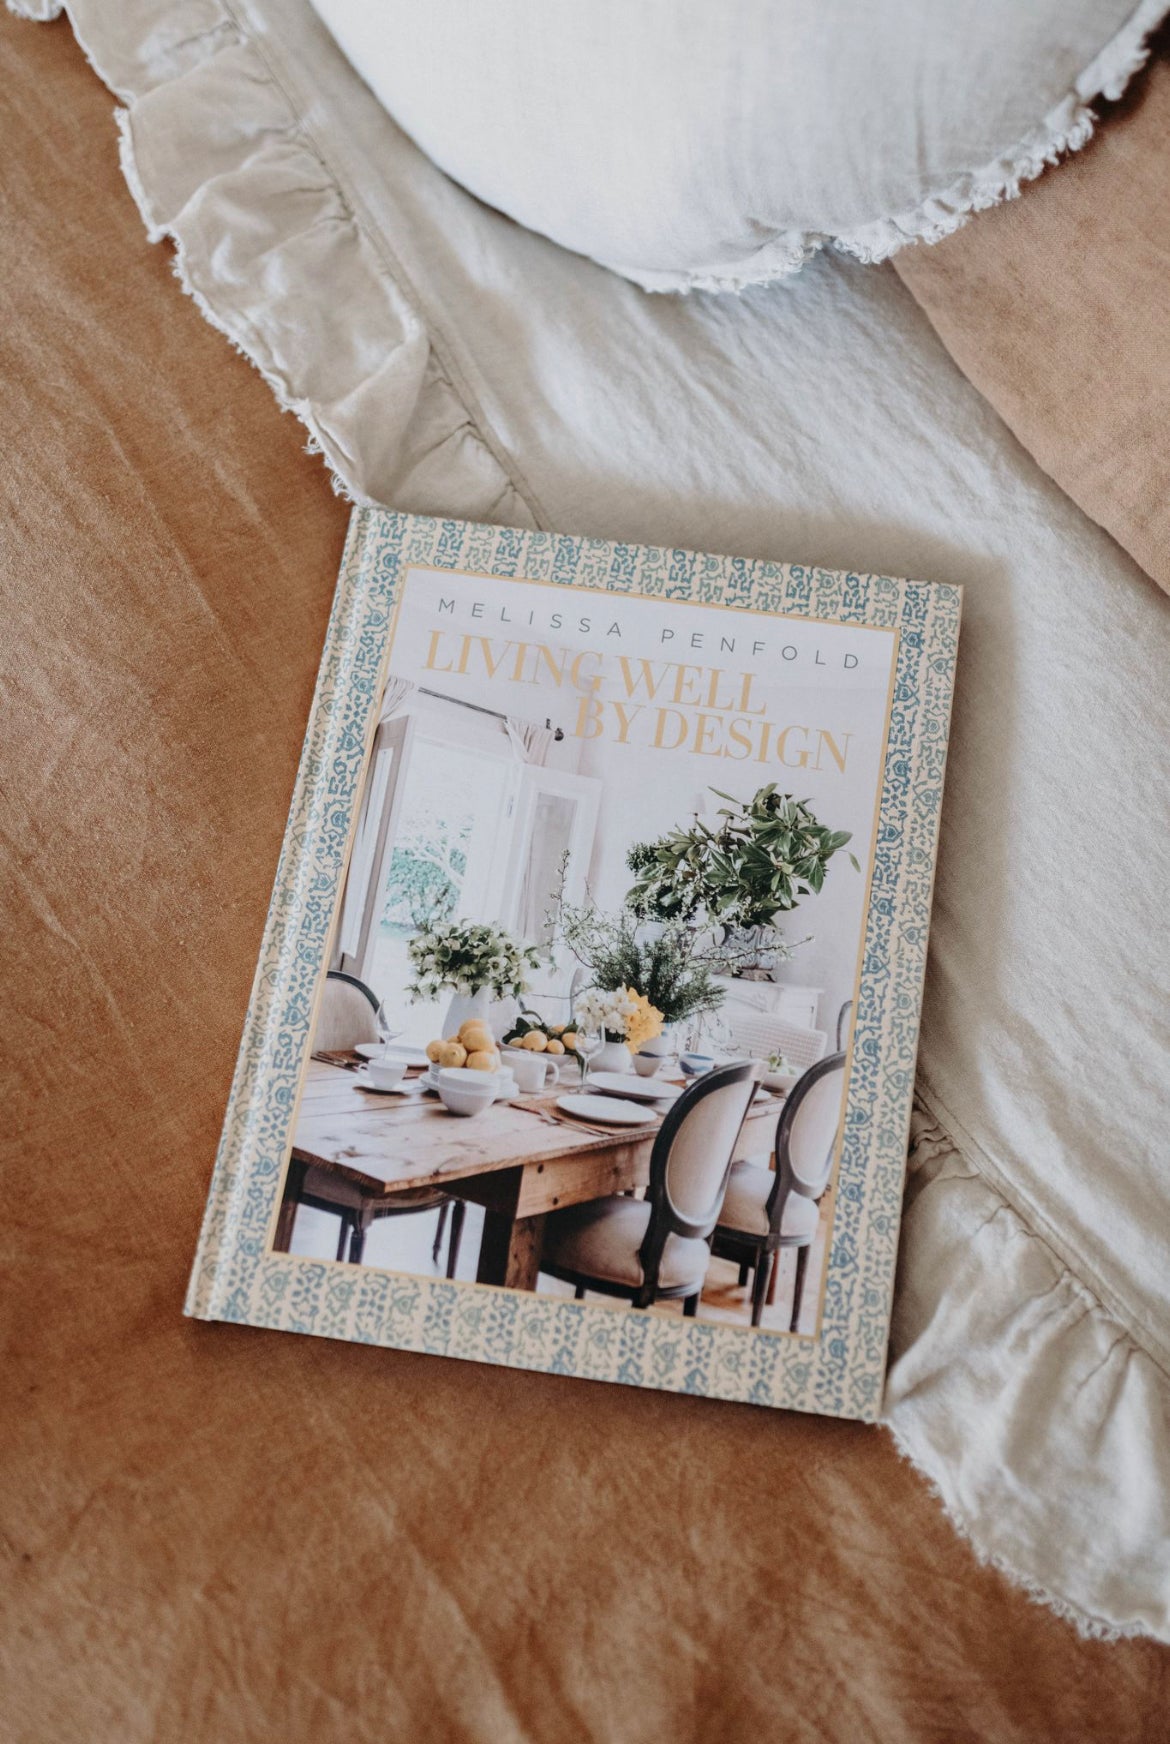 Living Well by Design ~ Melissa Penfold